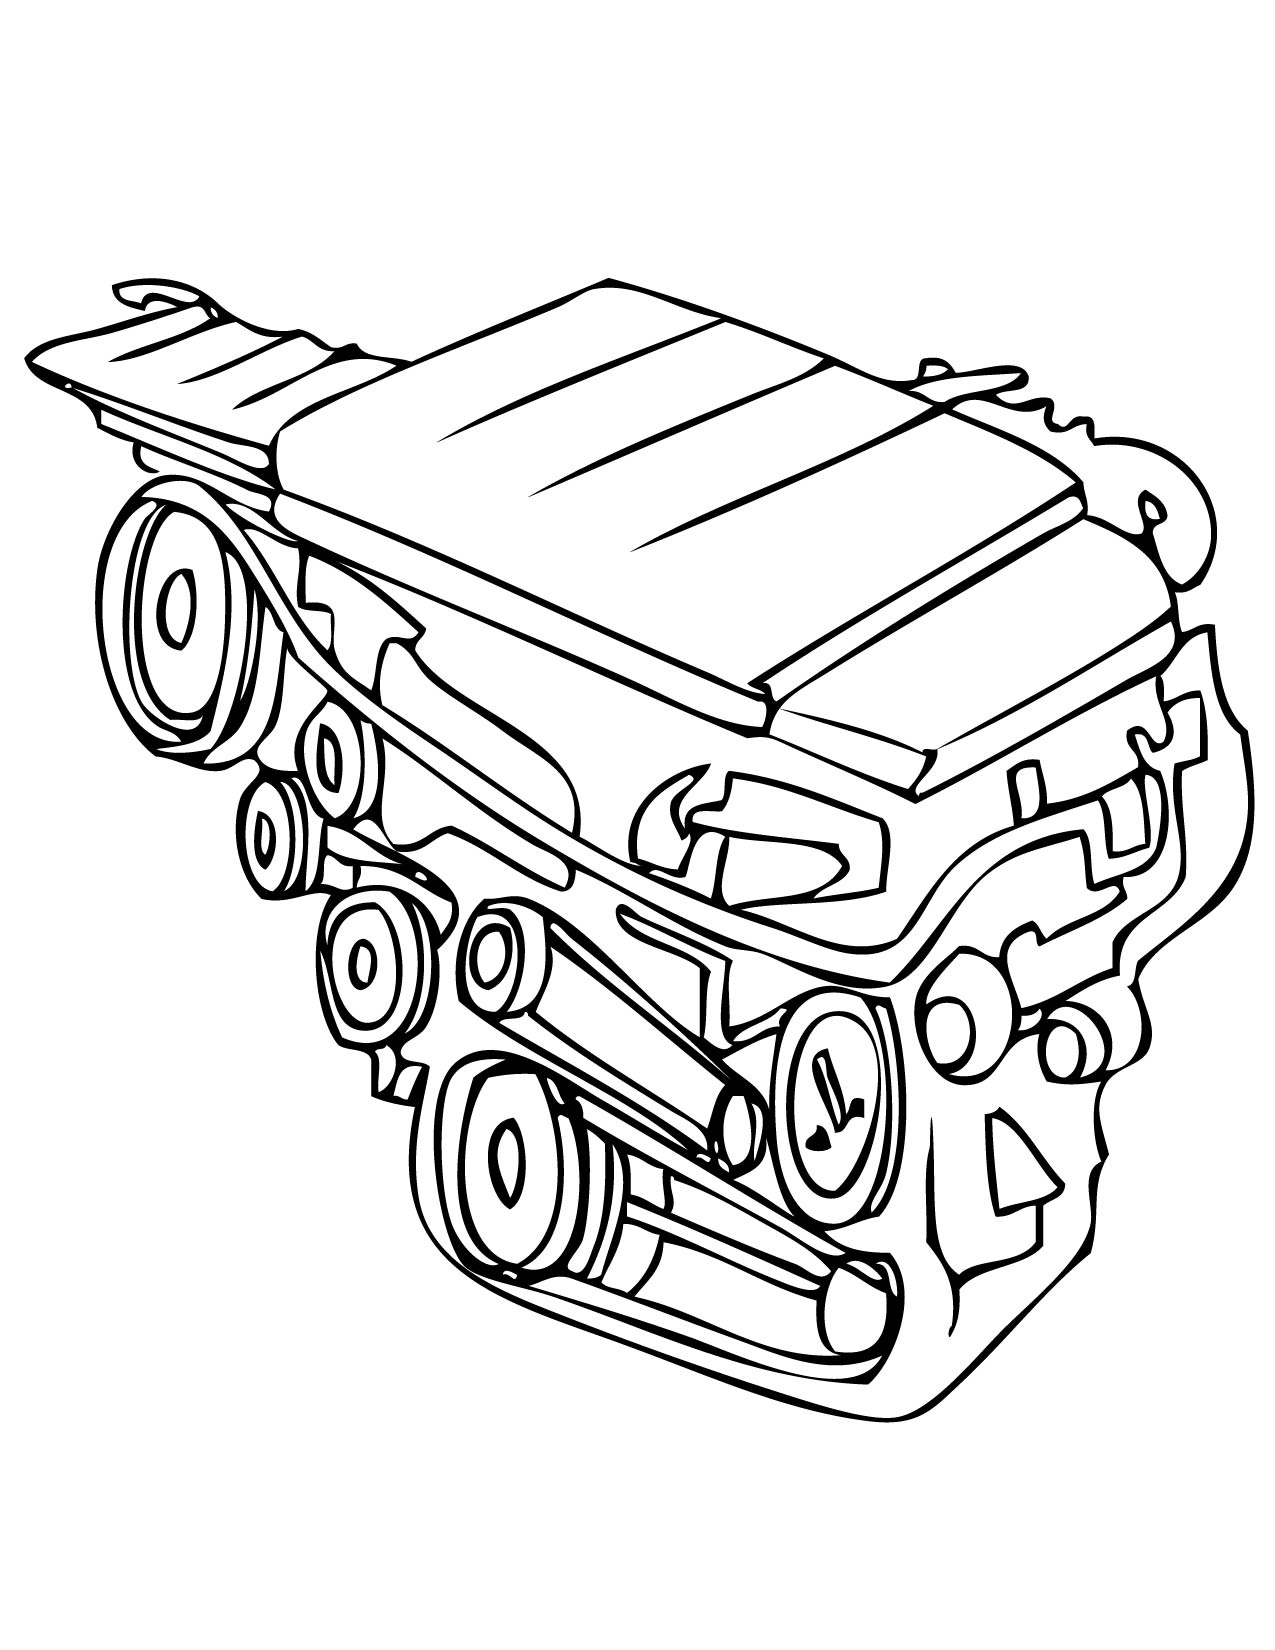 Car Parts Coloring Pages at GetDrawings | Free download